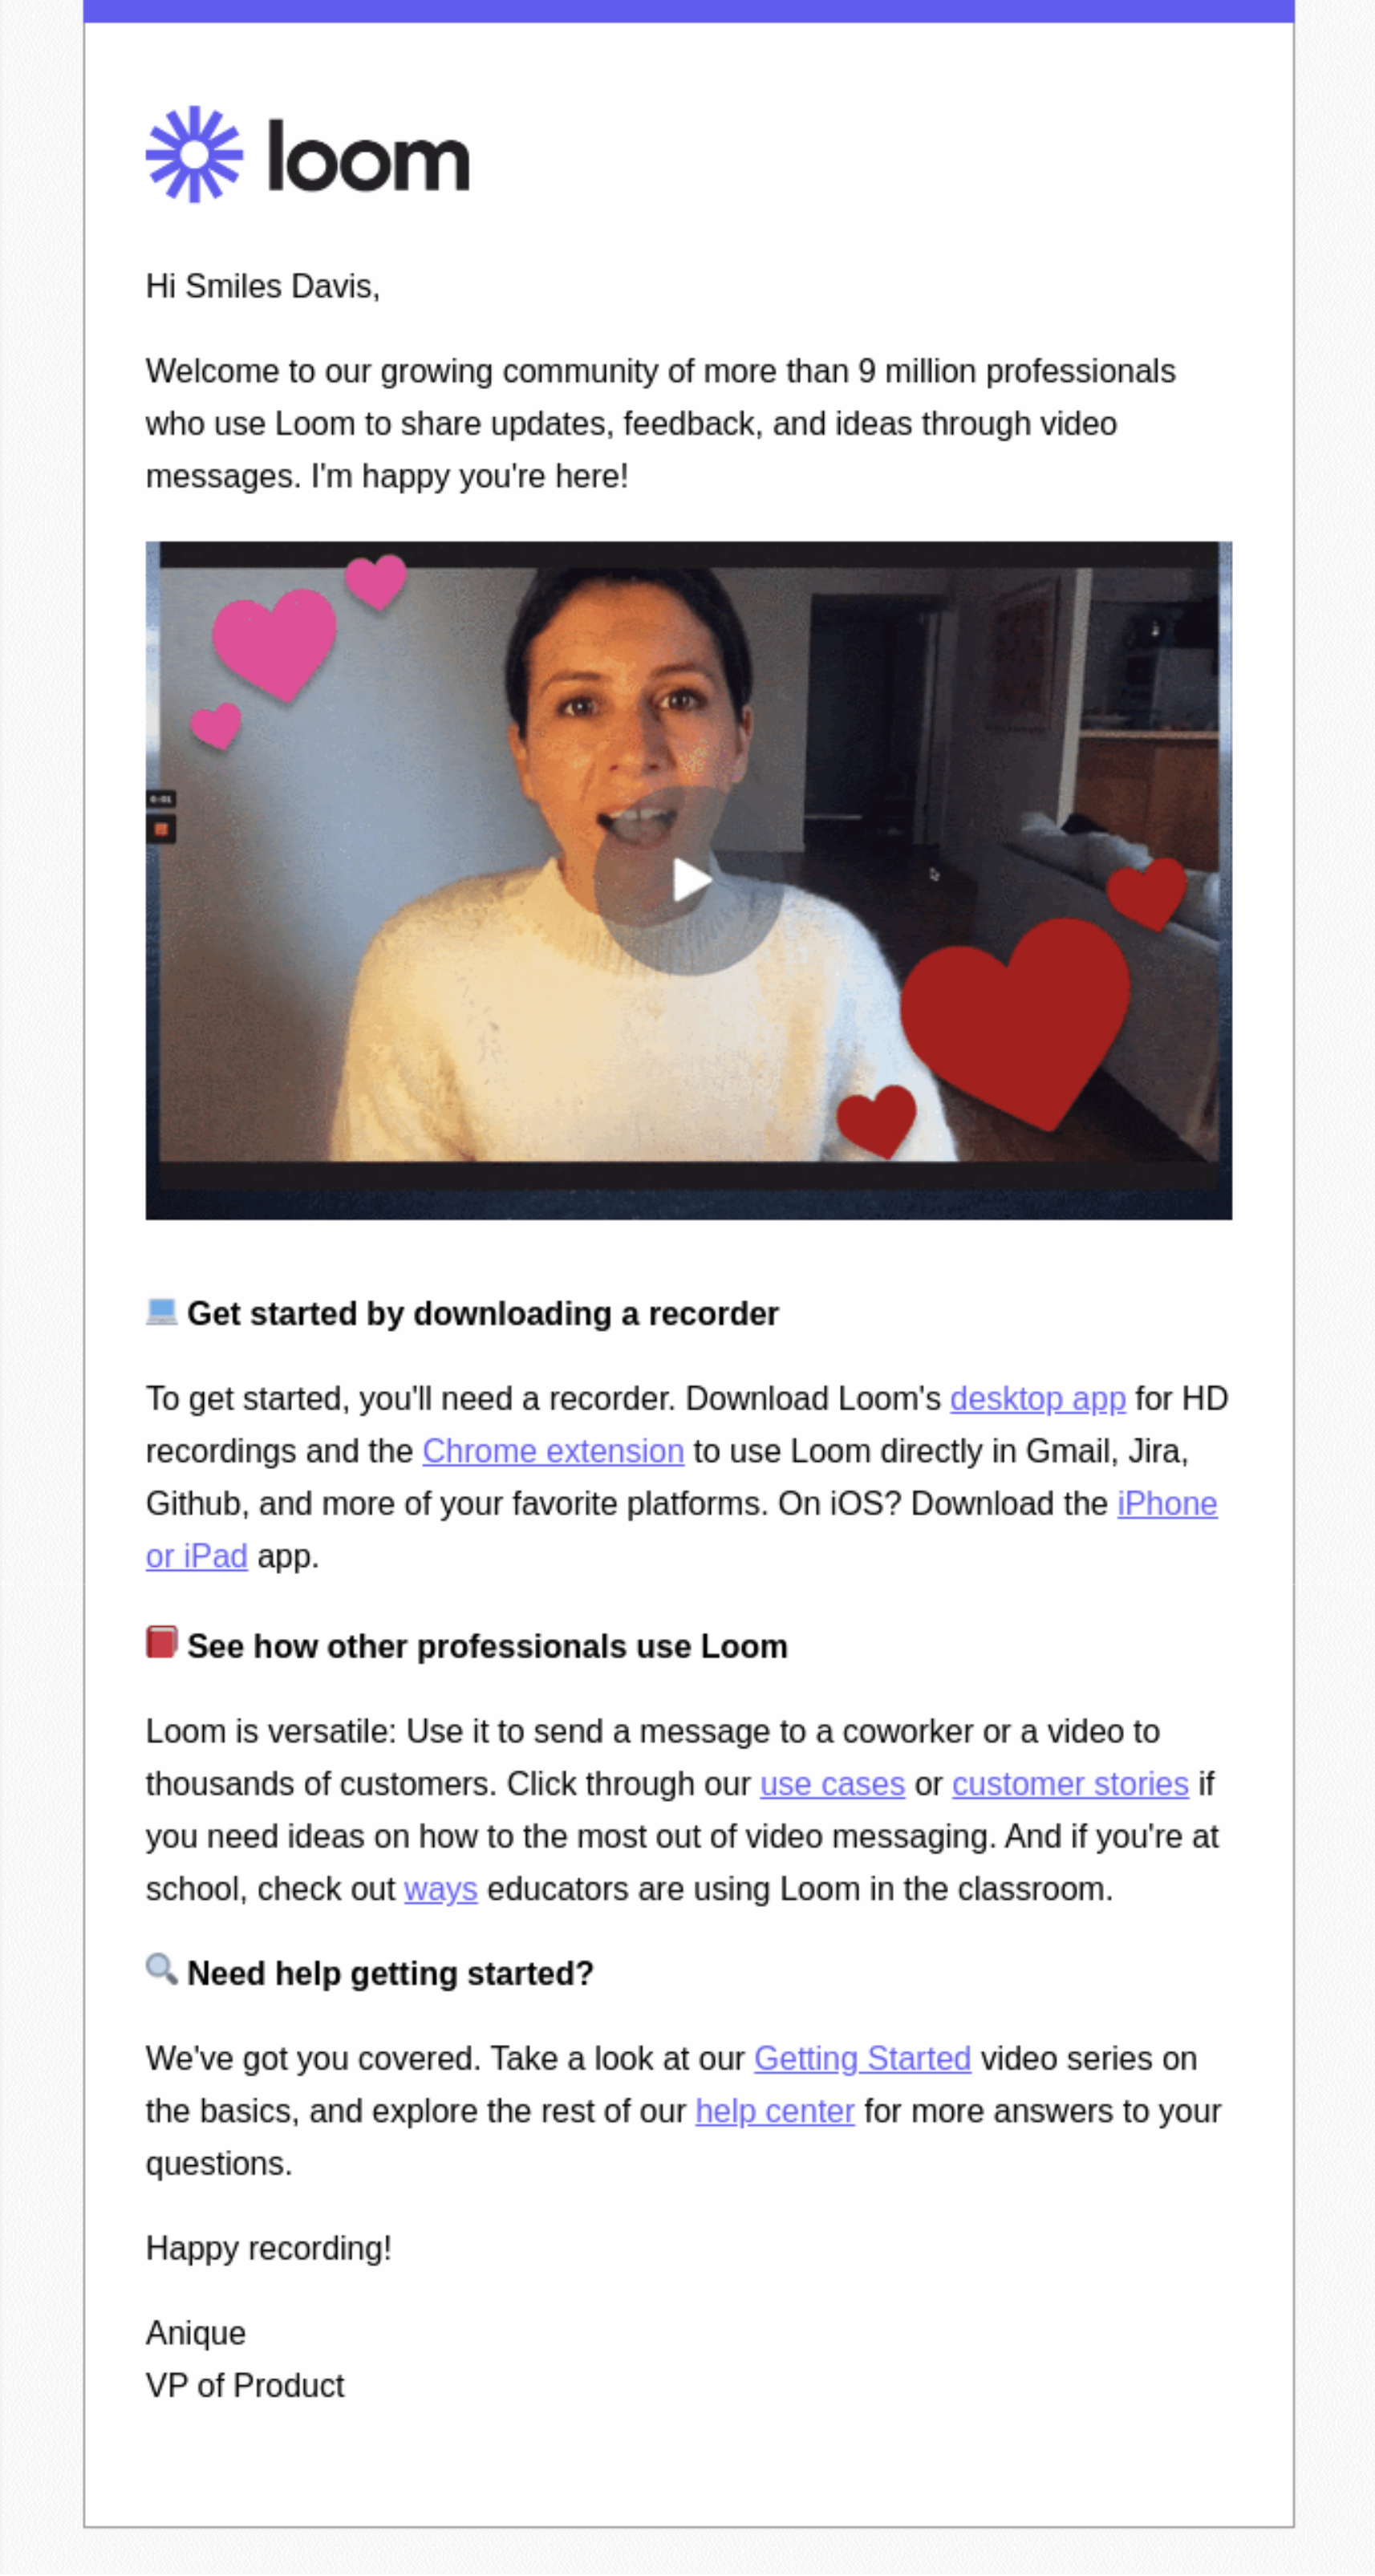 GIFs in SaaS Emails: Screenshot of Loom's welcome email